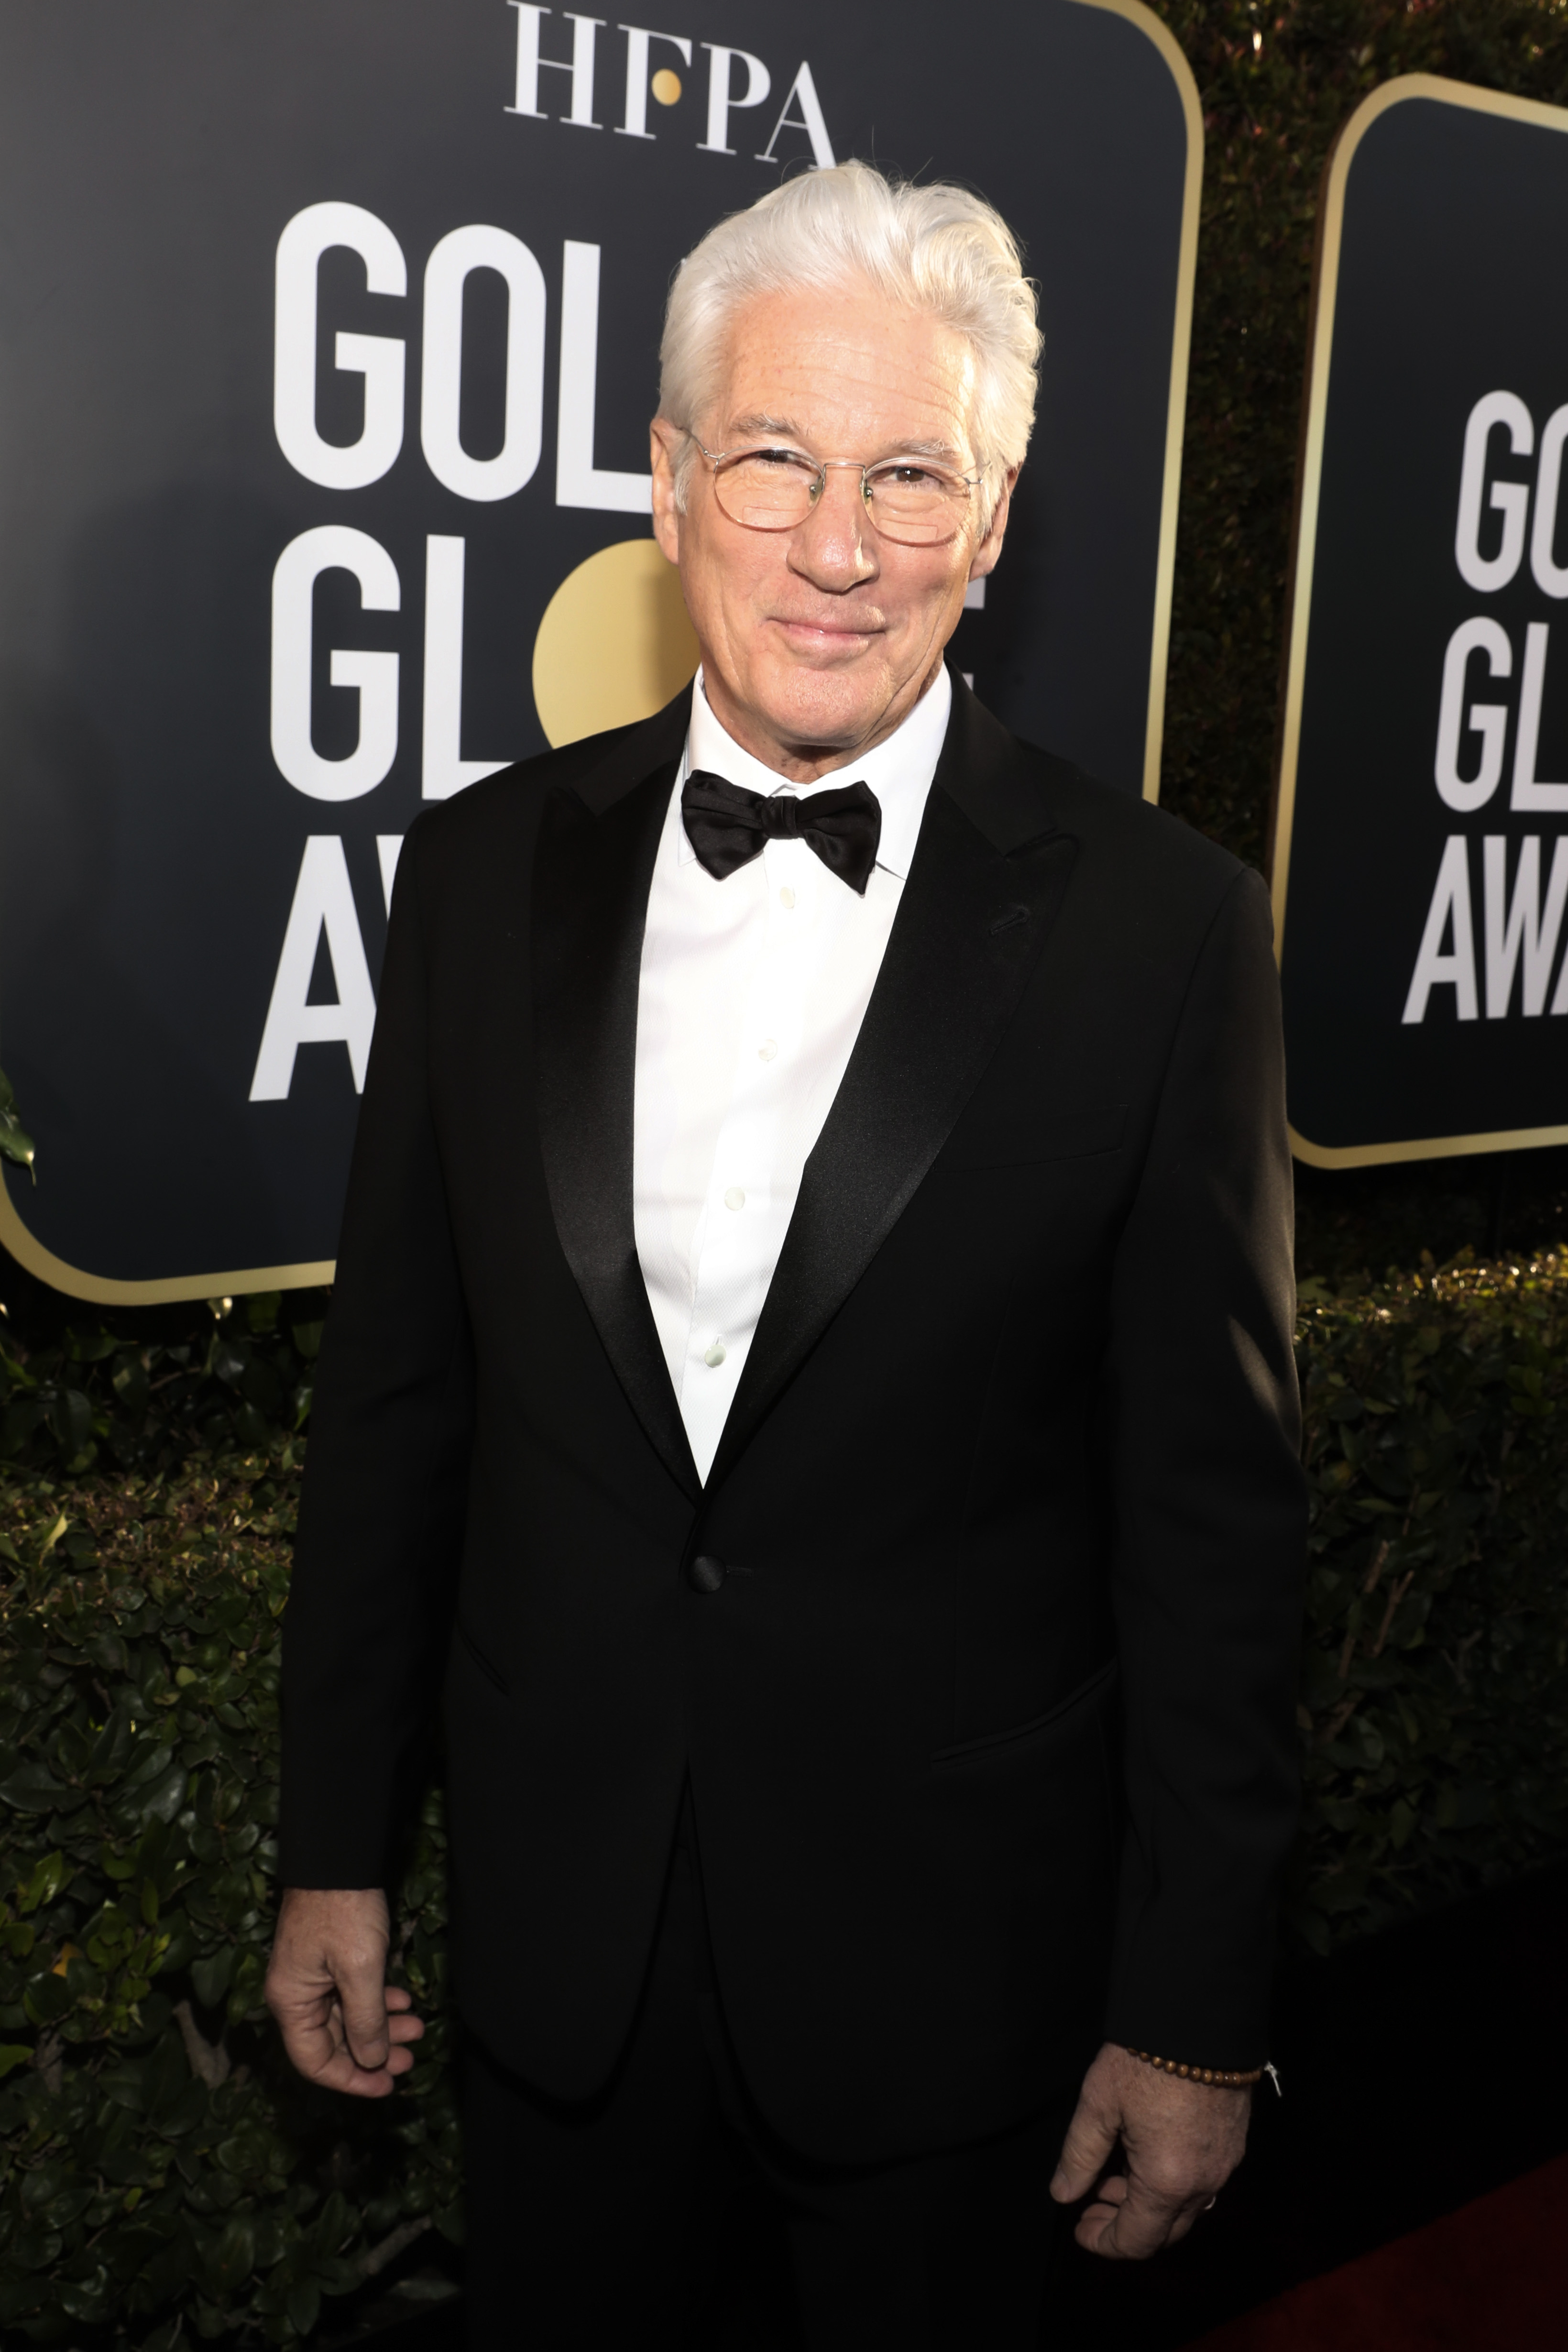 Richard Gere arrives to the 76th Annual Golden Globe Awards held at the Beverly Hilton Hotel on January 6, 2019. | Source: Getty Images